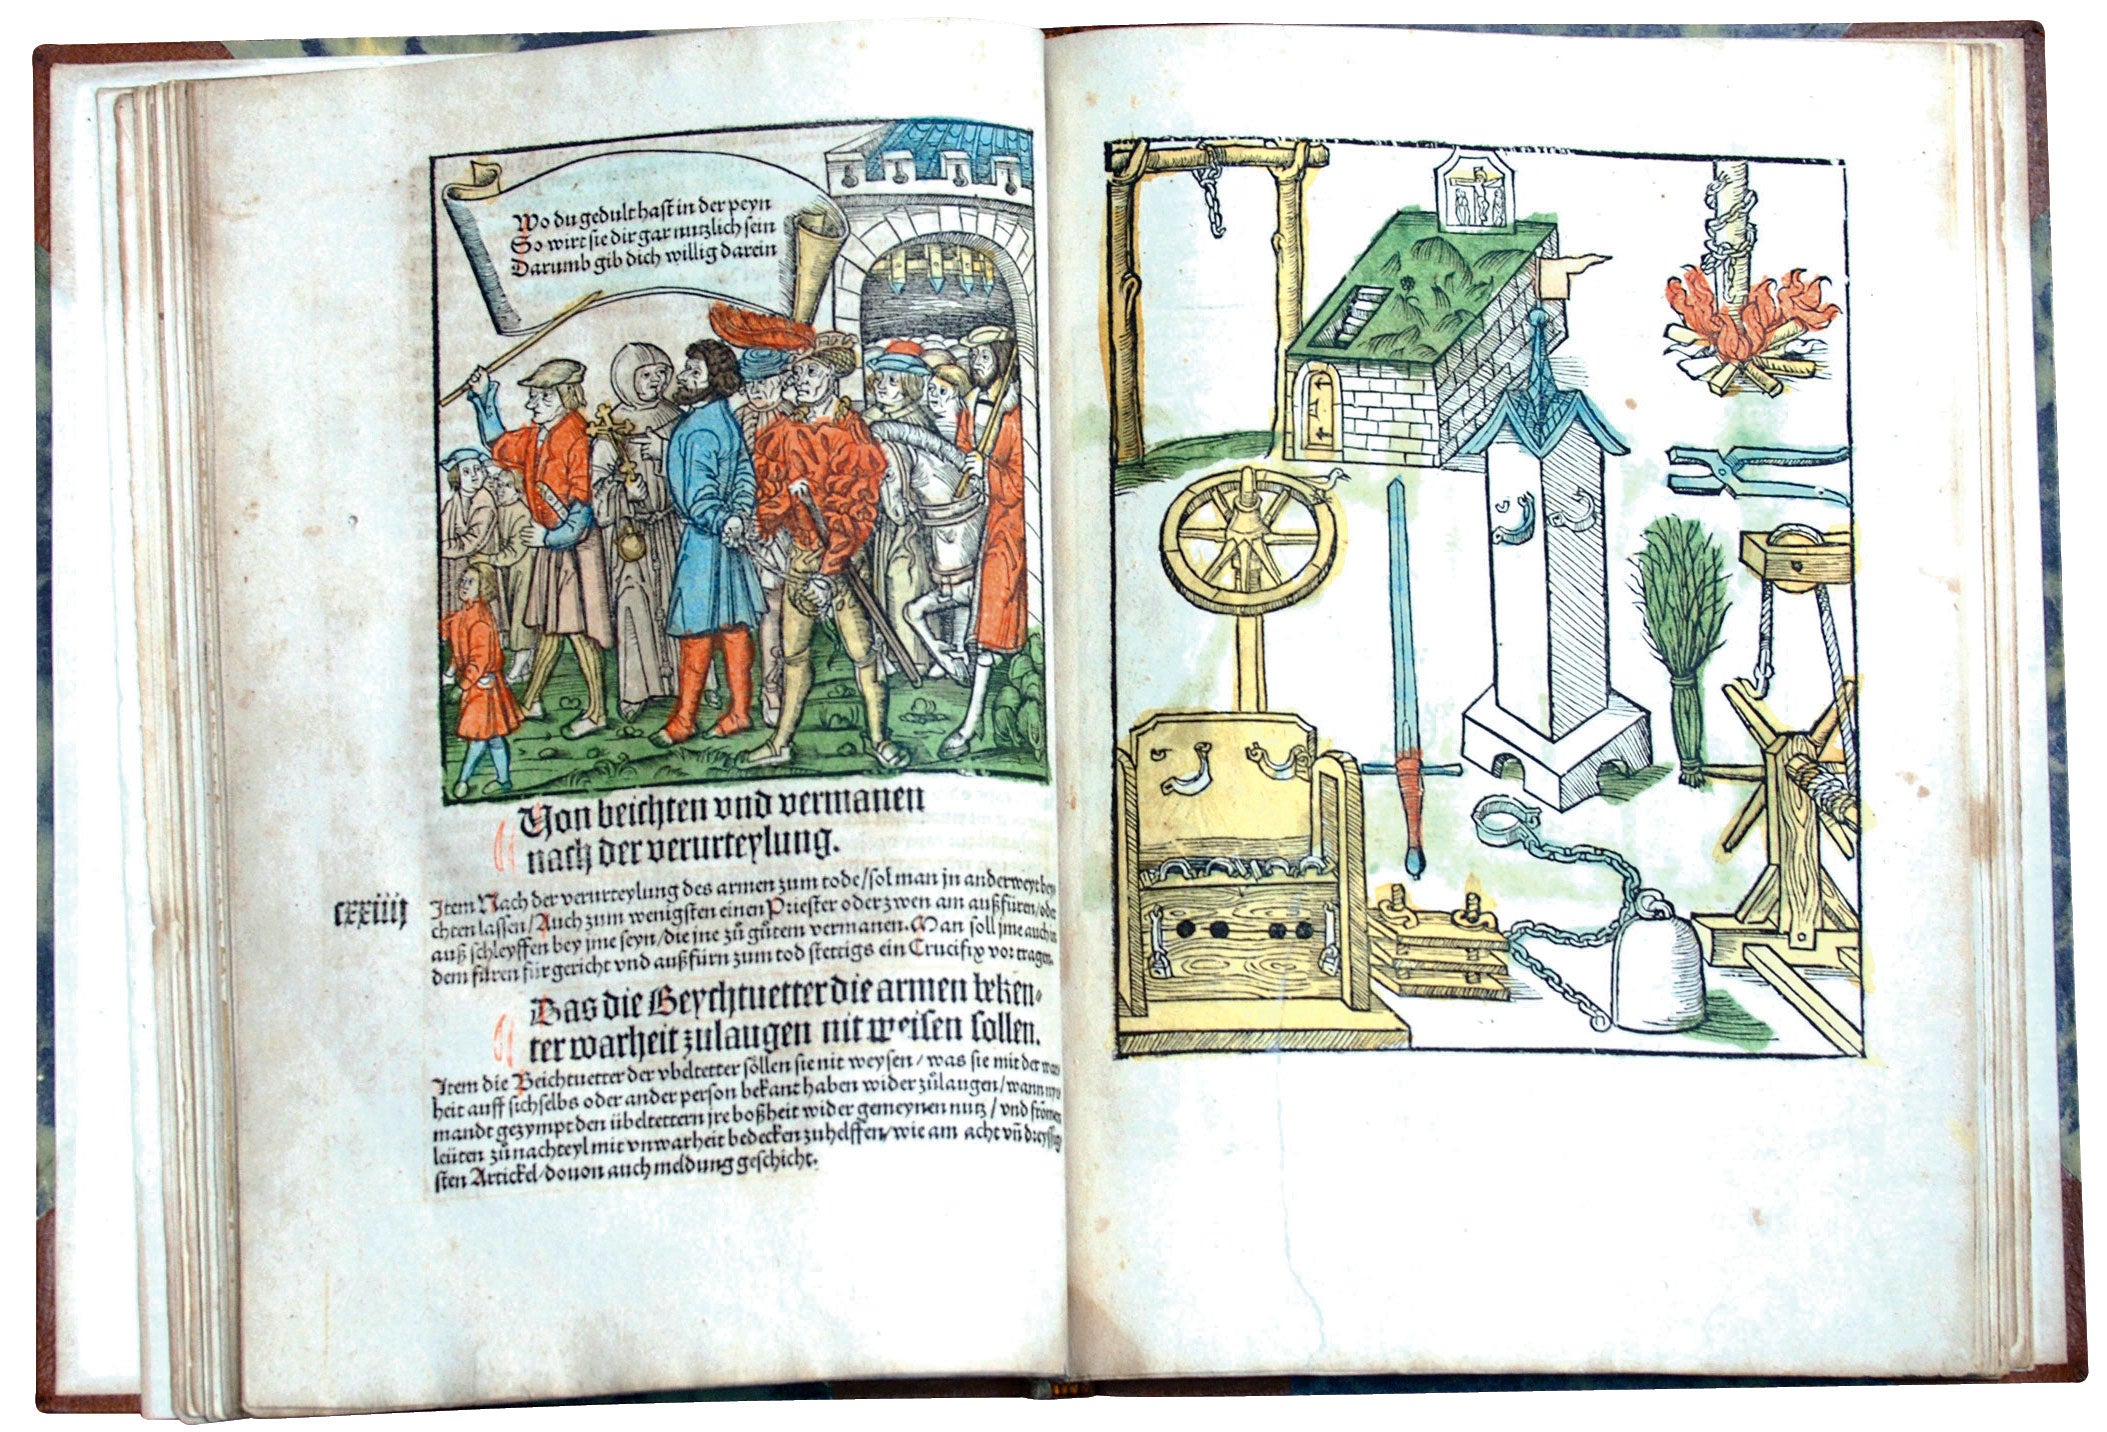 Illustrations from a 16th century book